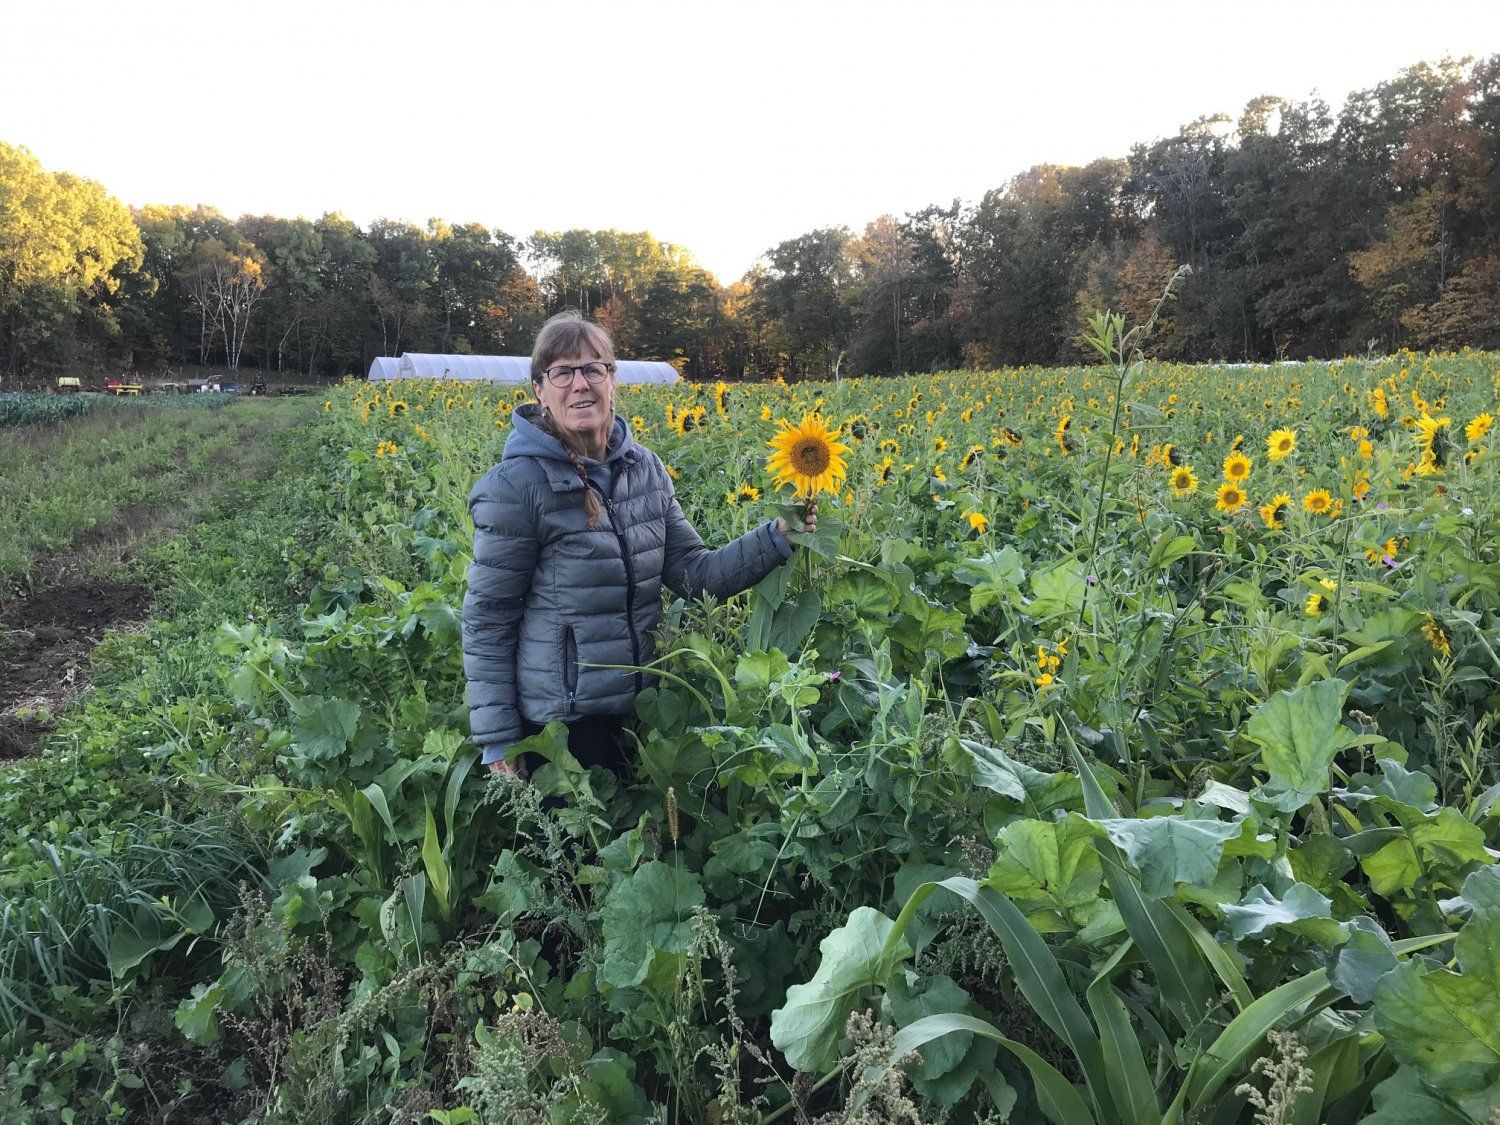 Previous Happening: Farm Happenings for October 22, 2021